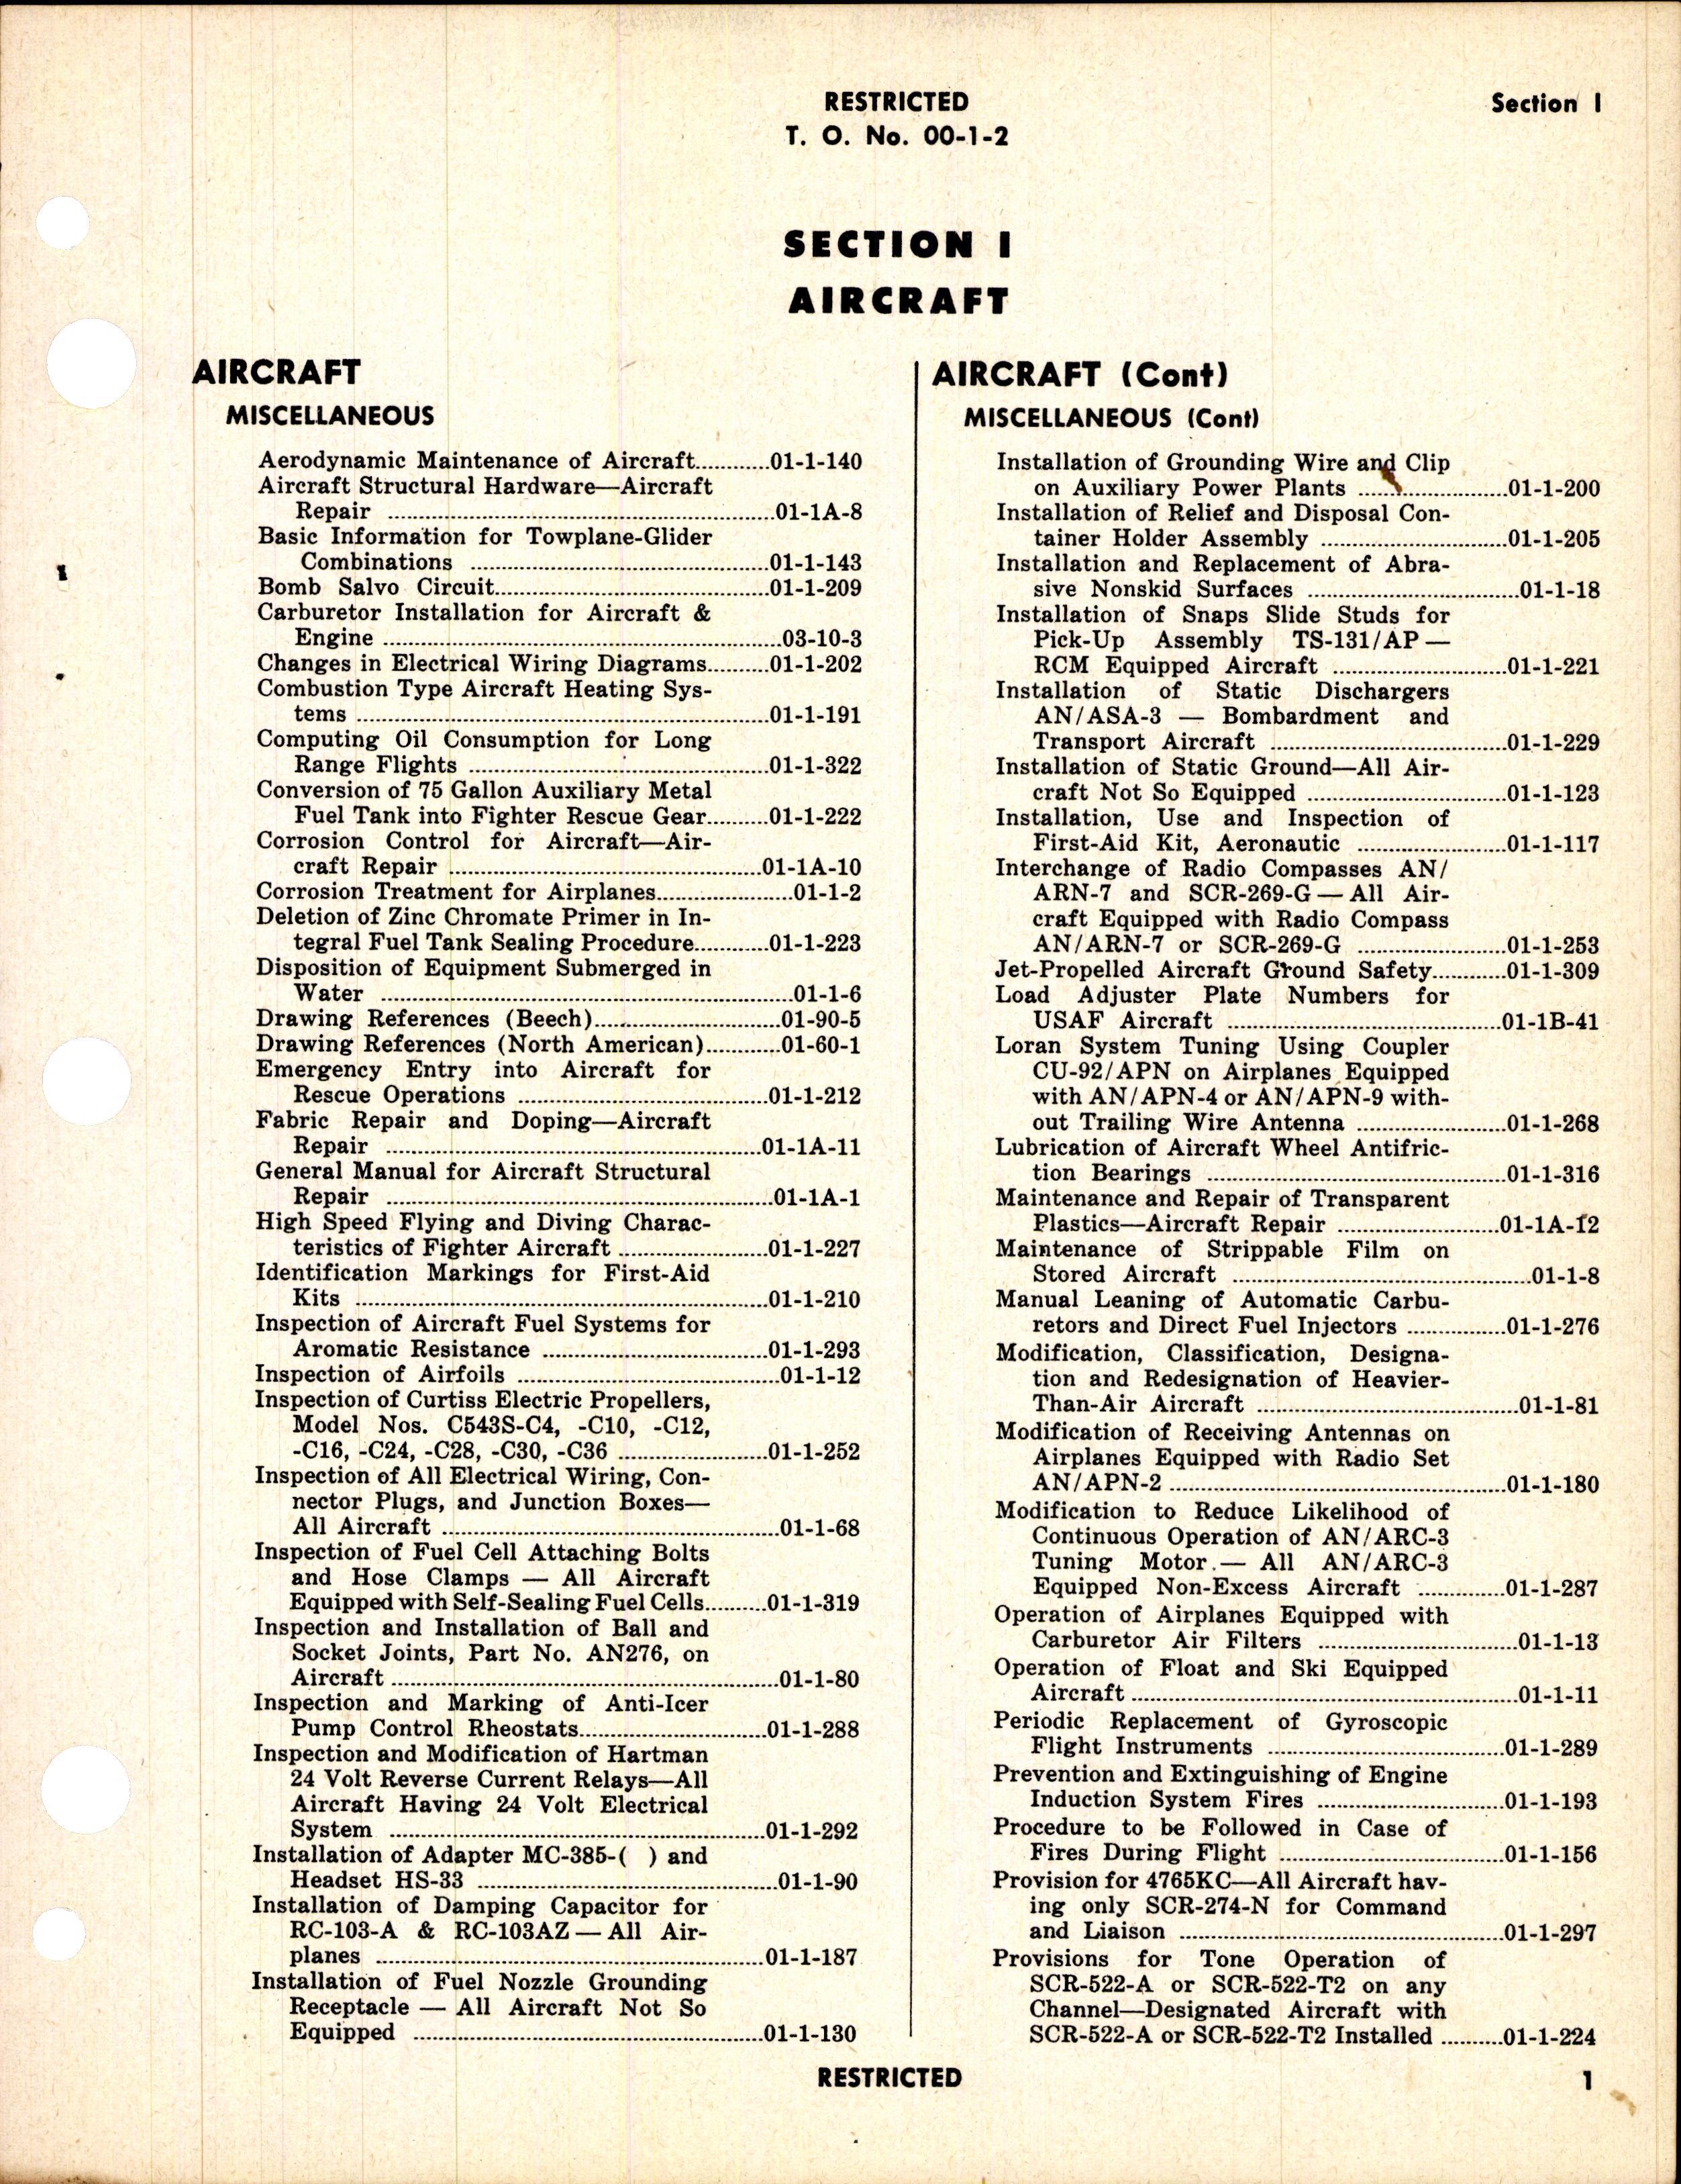 Sample page 5 from AirCorps Library document: Alphabetical index of Technical Publications